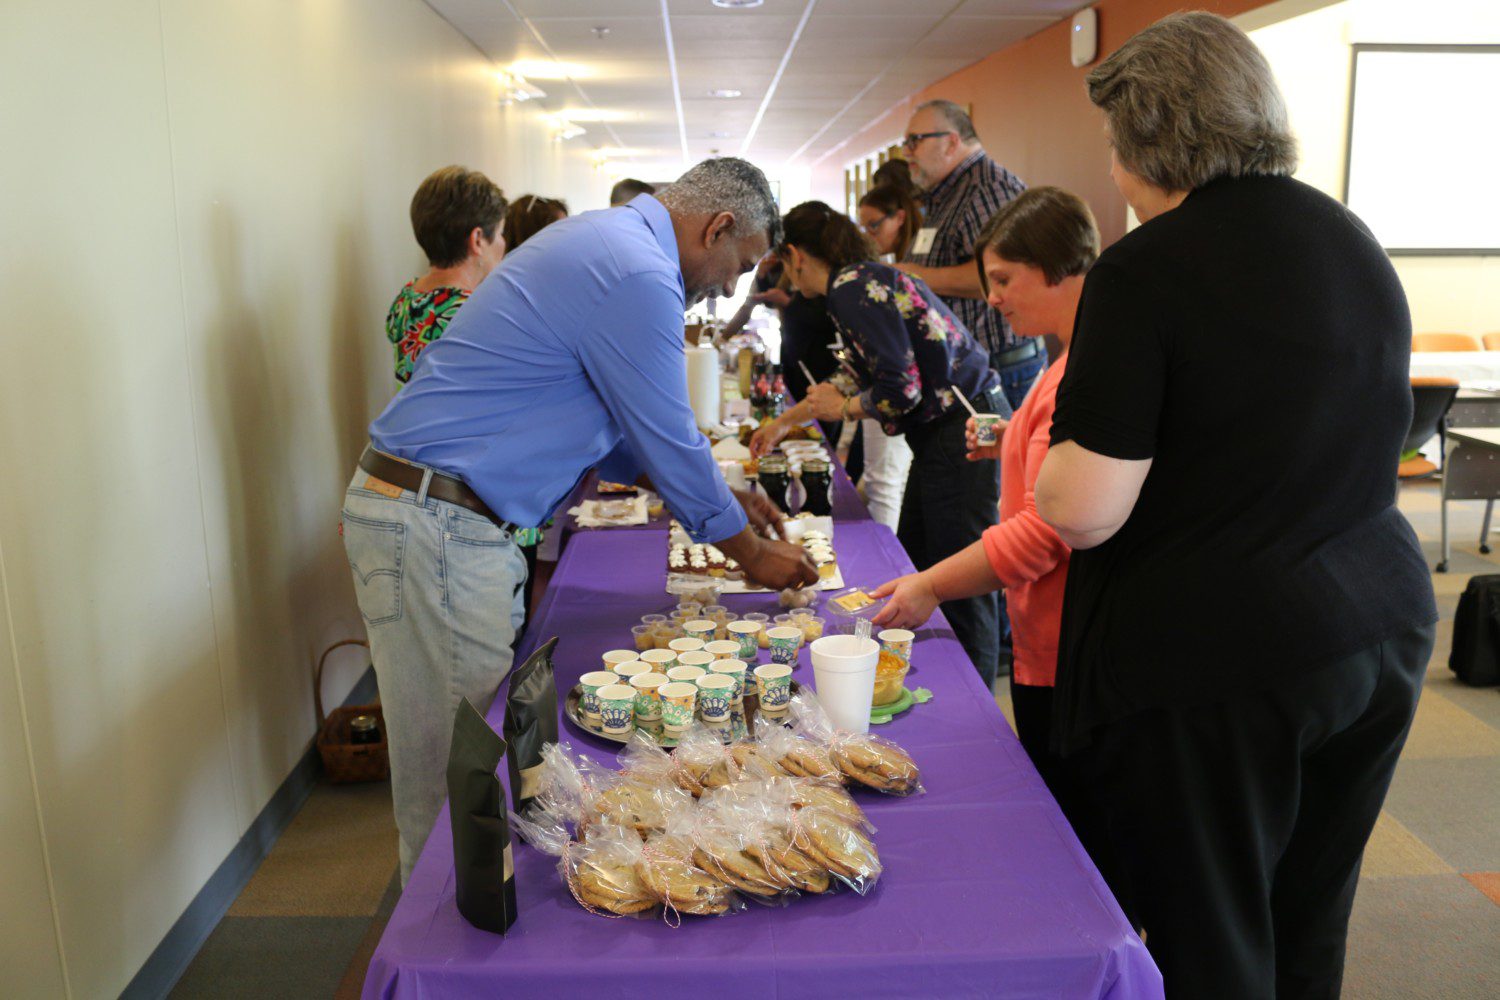 Recent graduates of Clemson's Food2Market program bring their creations for other participants to taste during a networking session at Clemson's Sandhills REC.